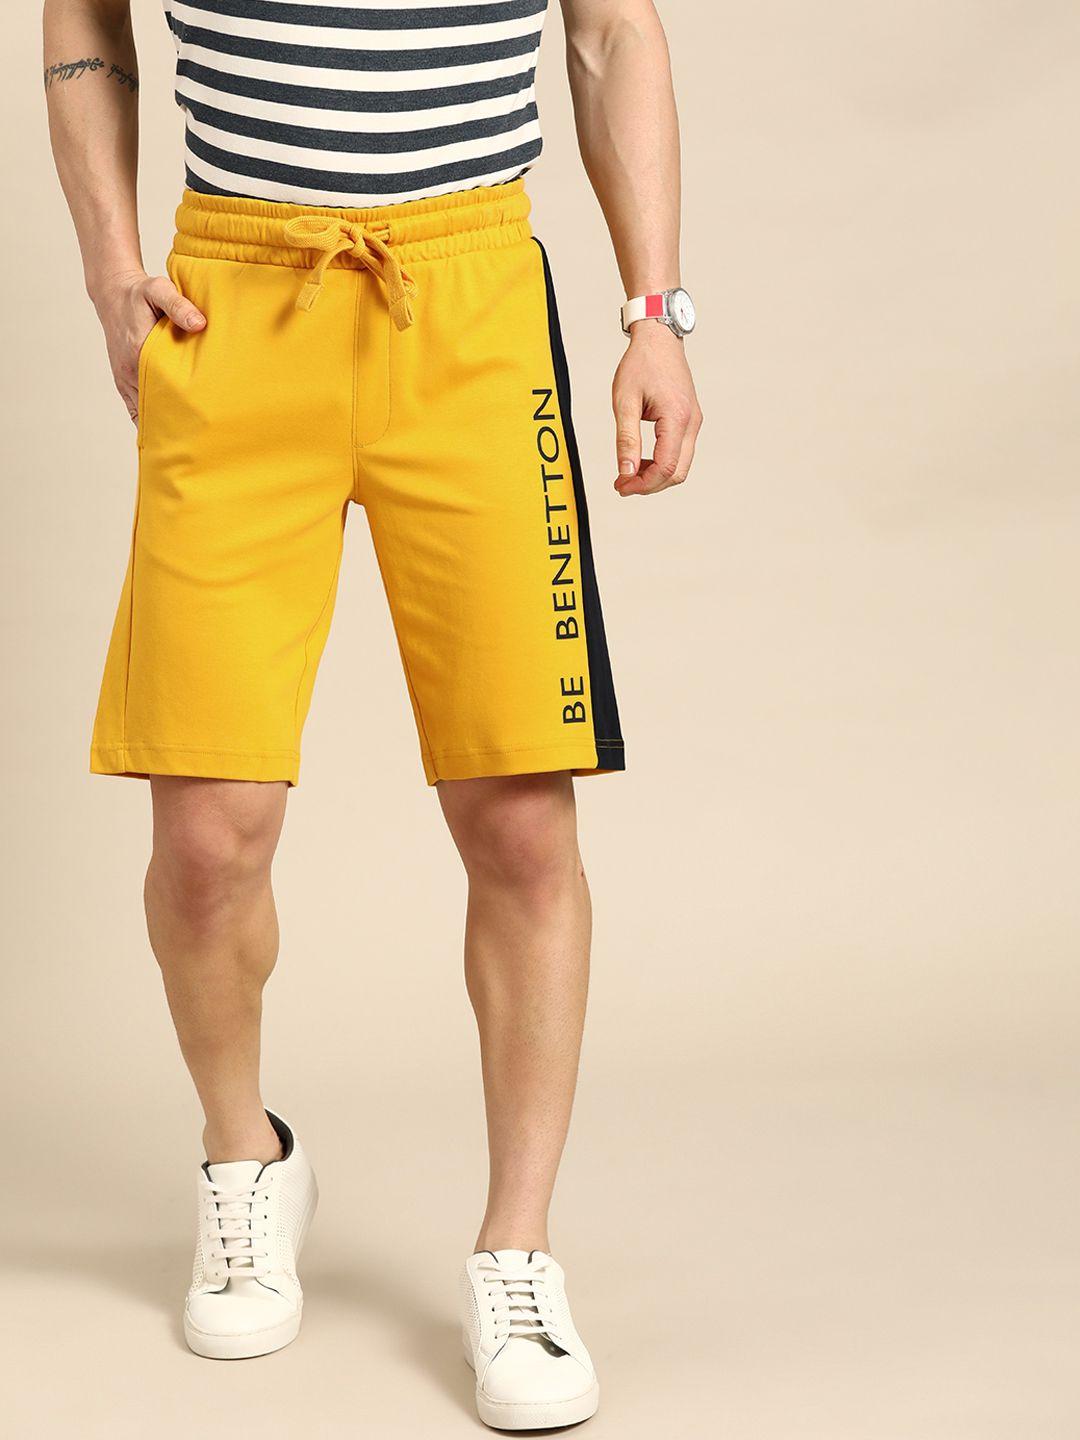 united colors of benetton men typography printed pure cotton shorts